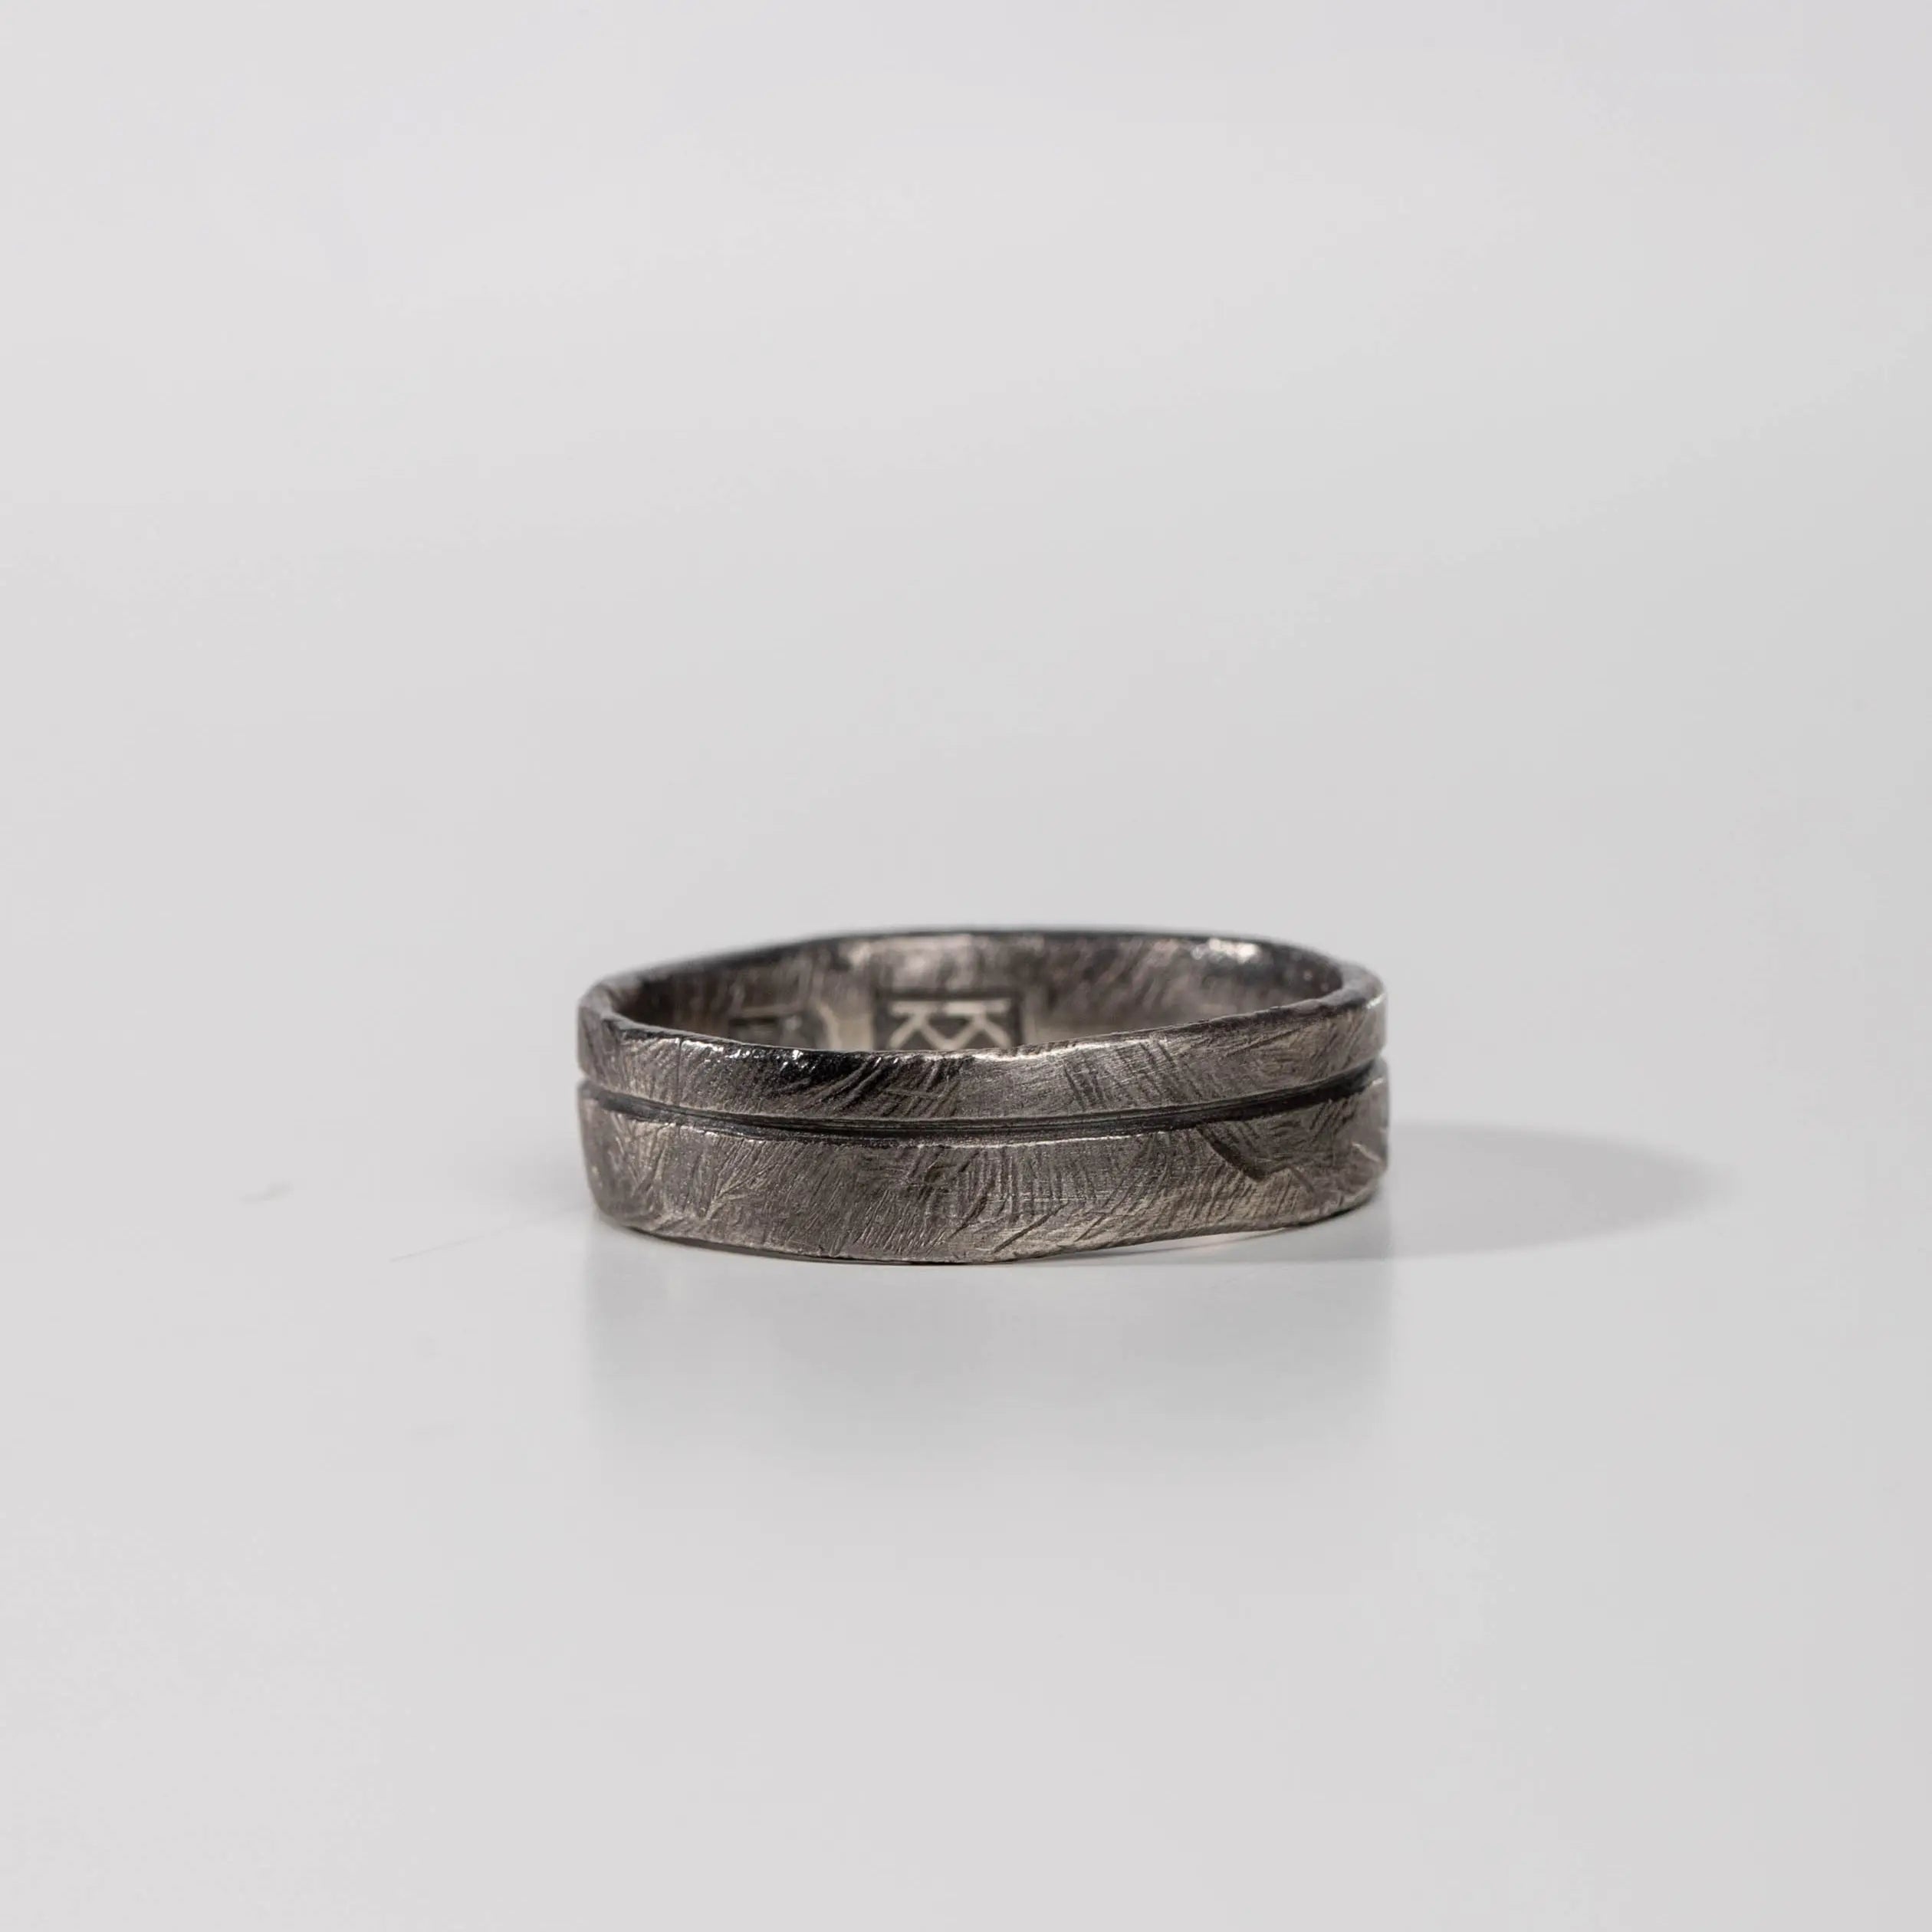 Band Ring Oxidized Silver 925